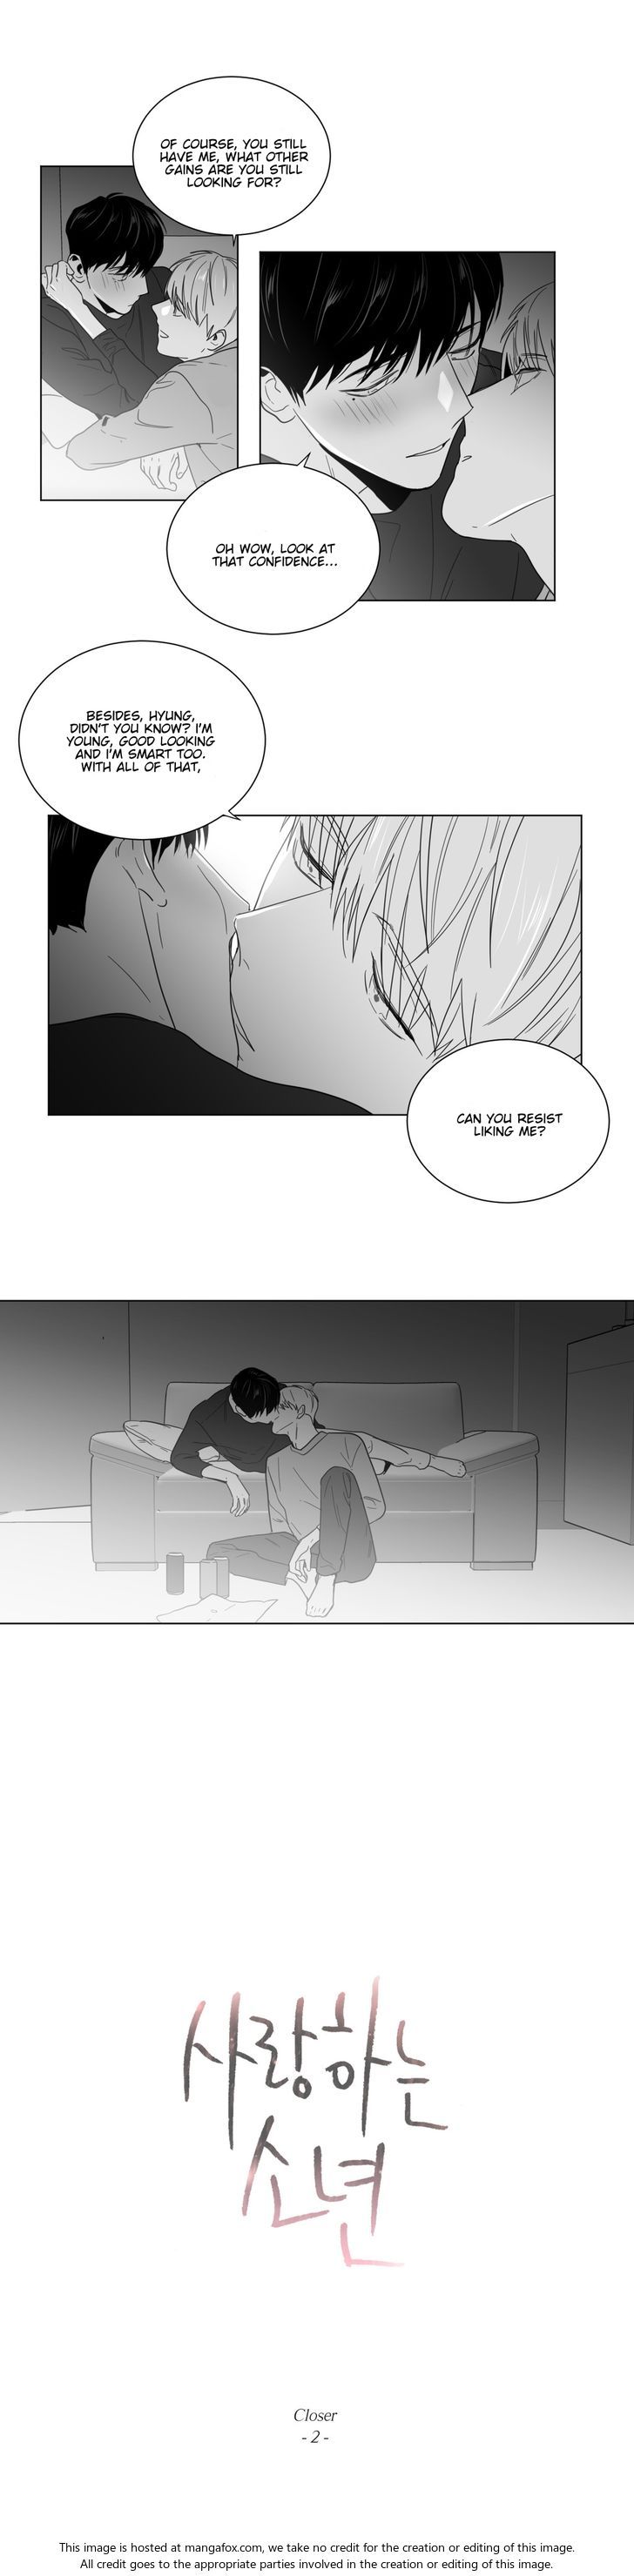 Lover Boy (Lezhin) Chapter 019 page 6